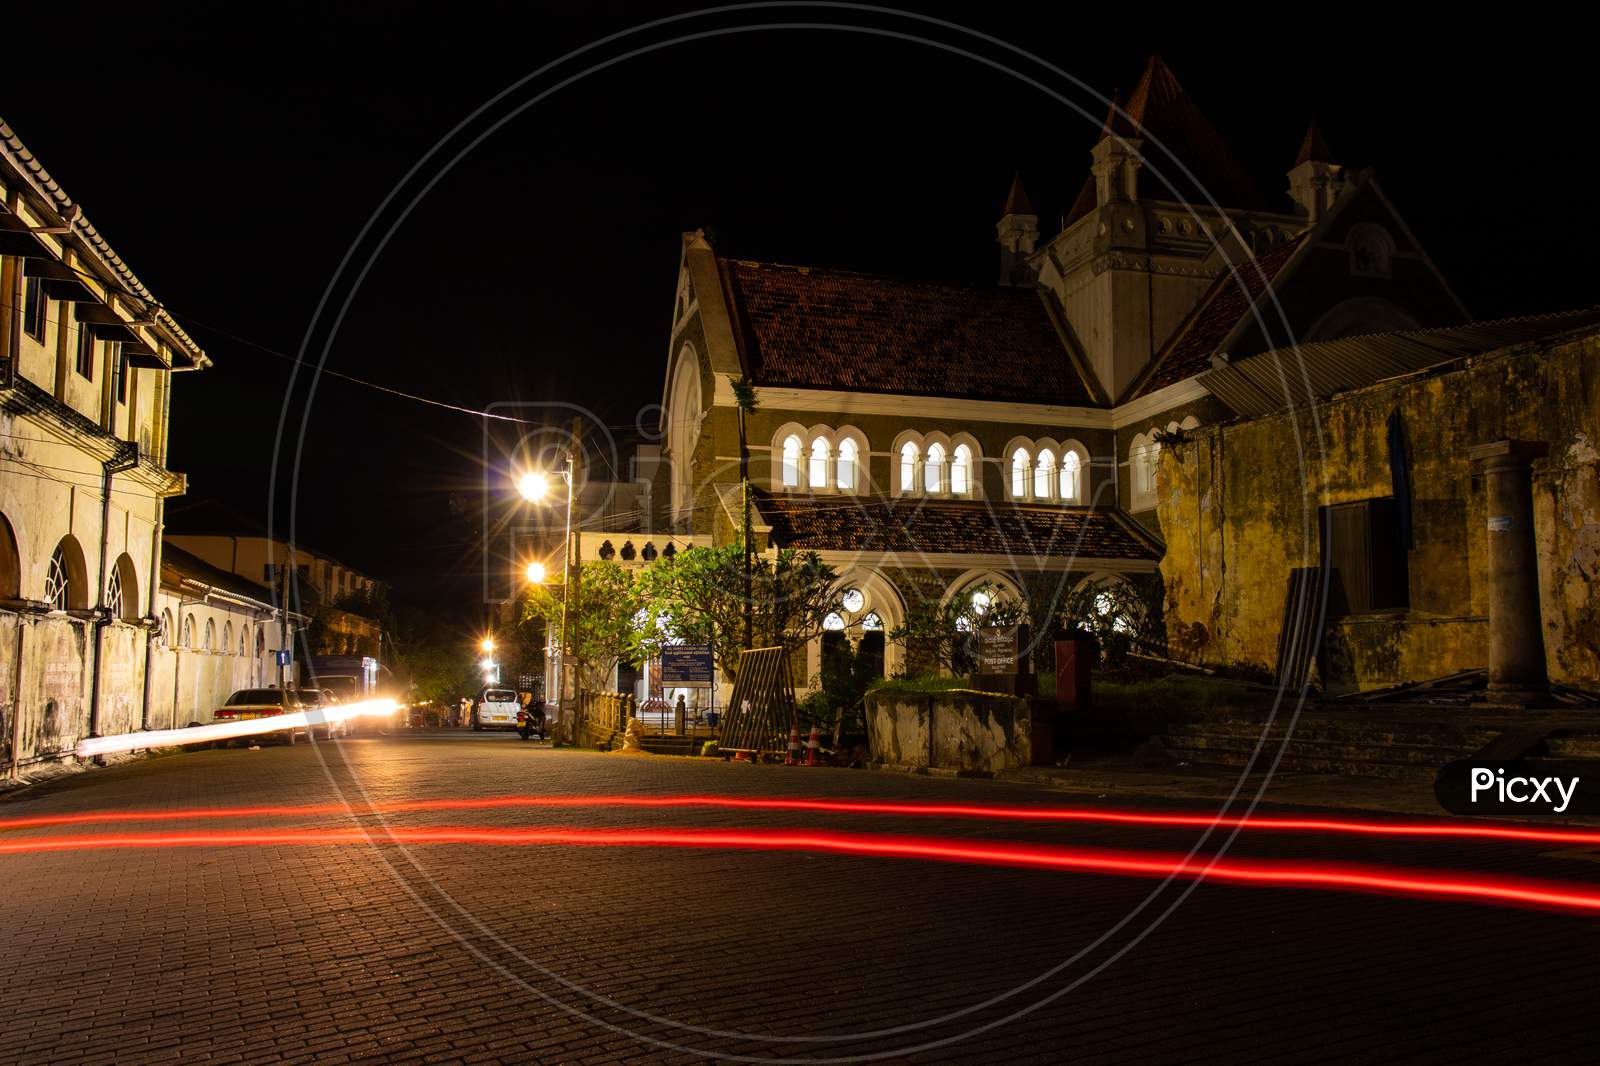 Long Exposure Street Photograph In Galle Fort